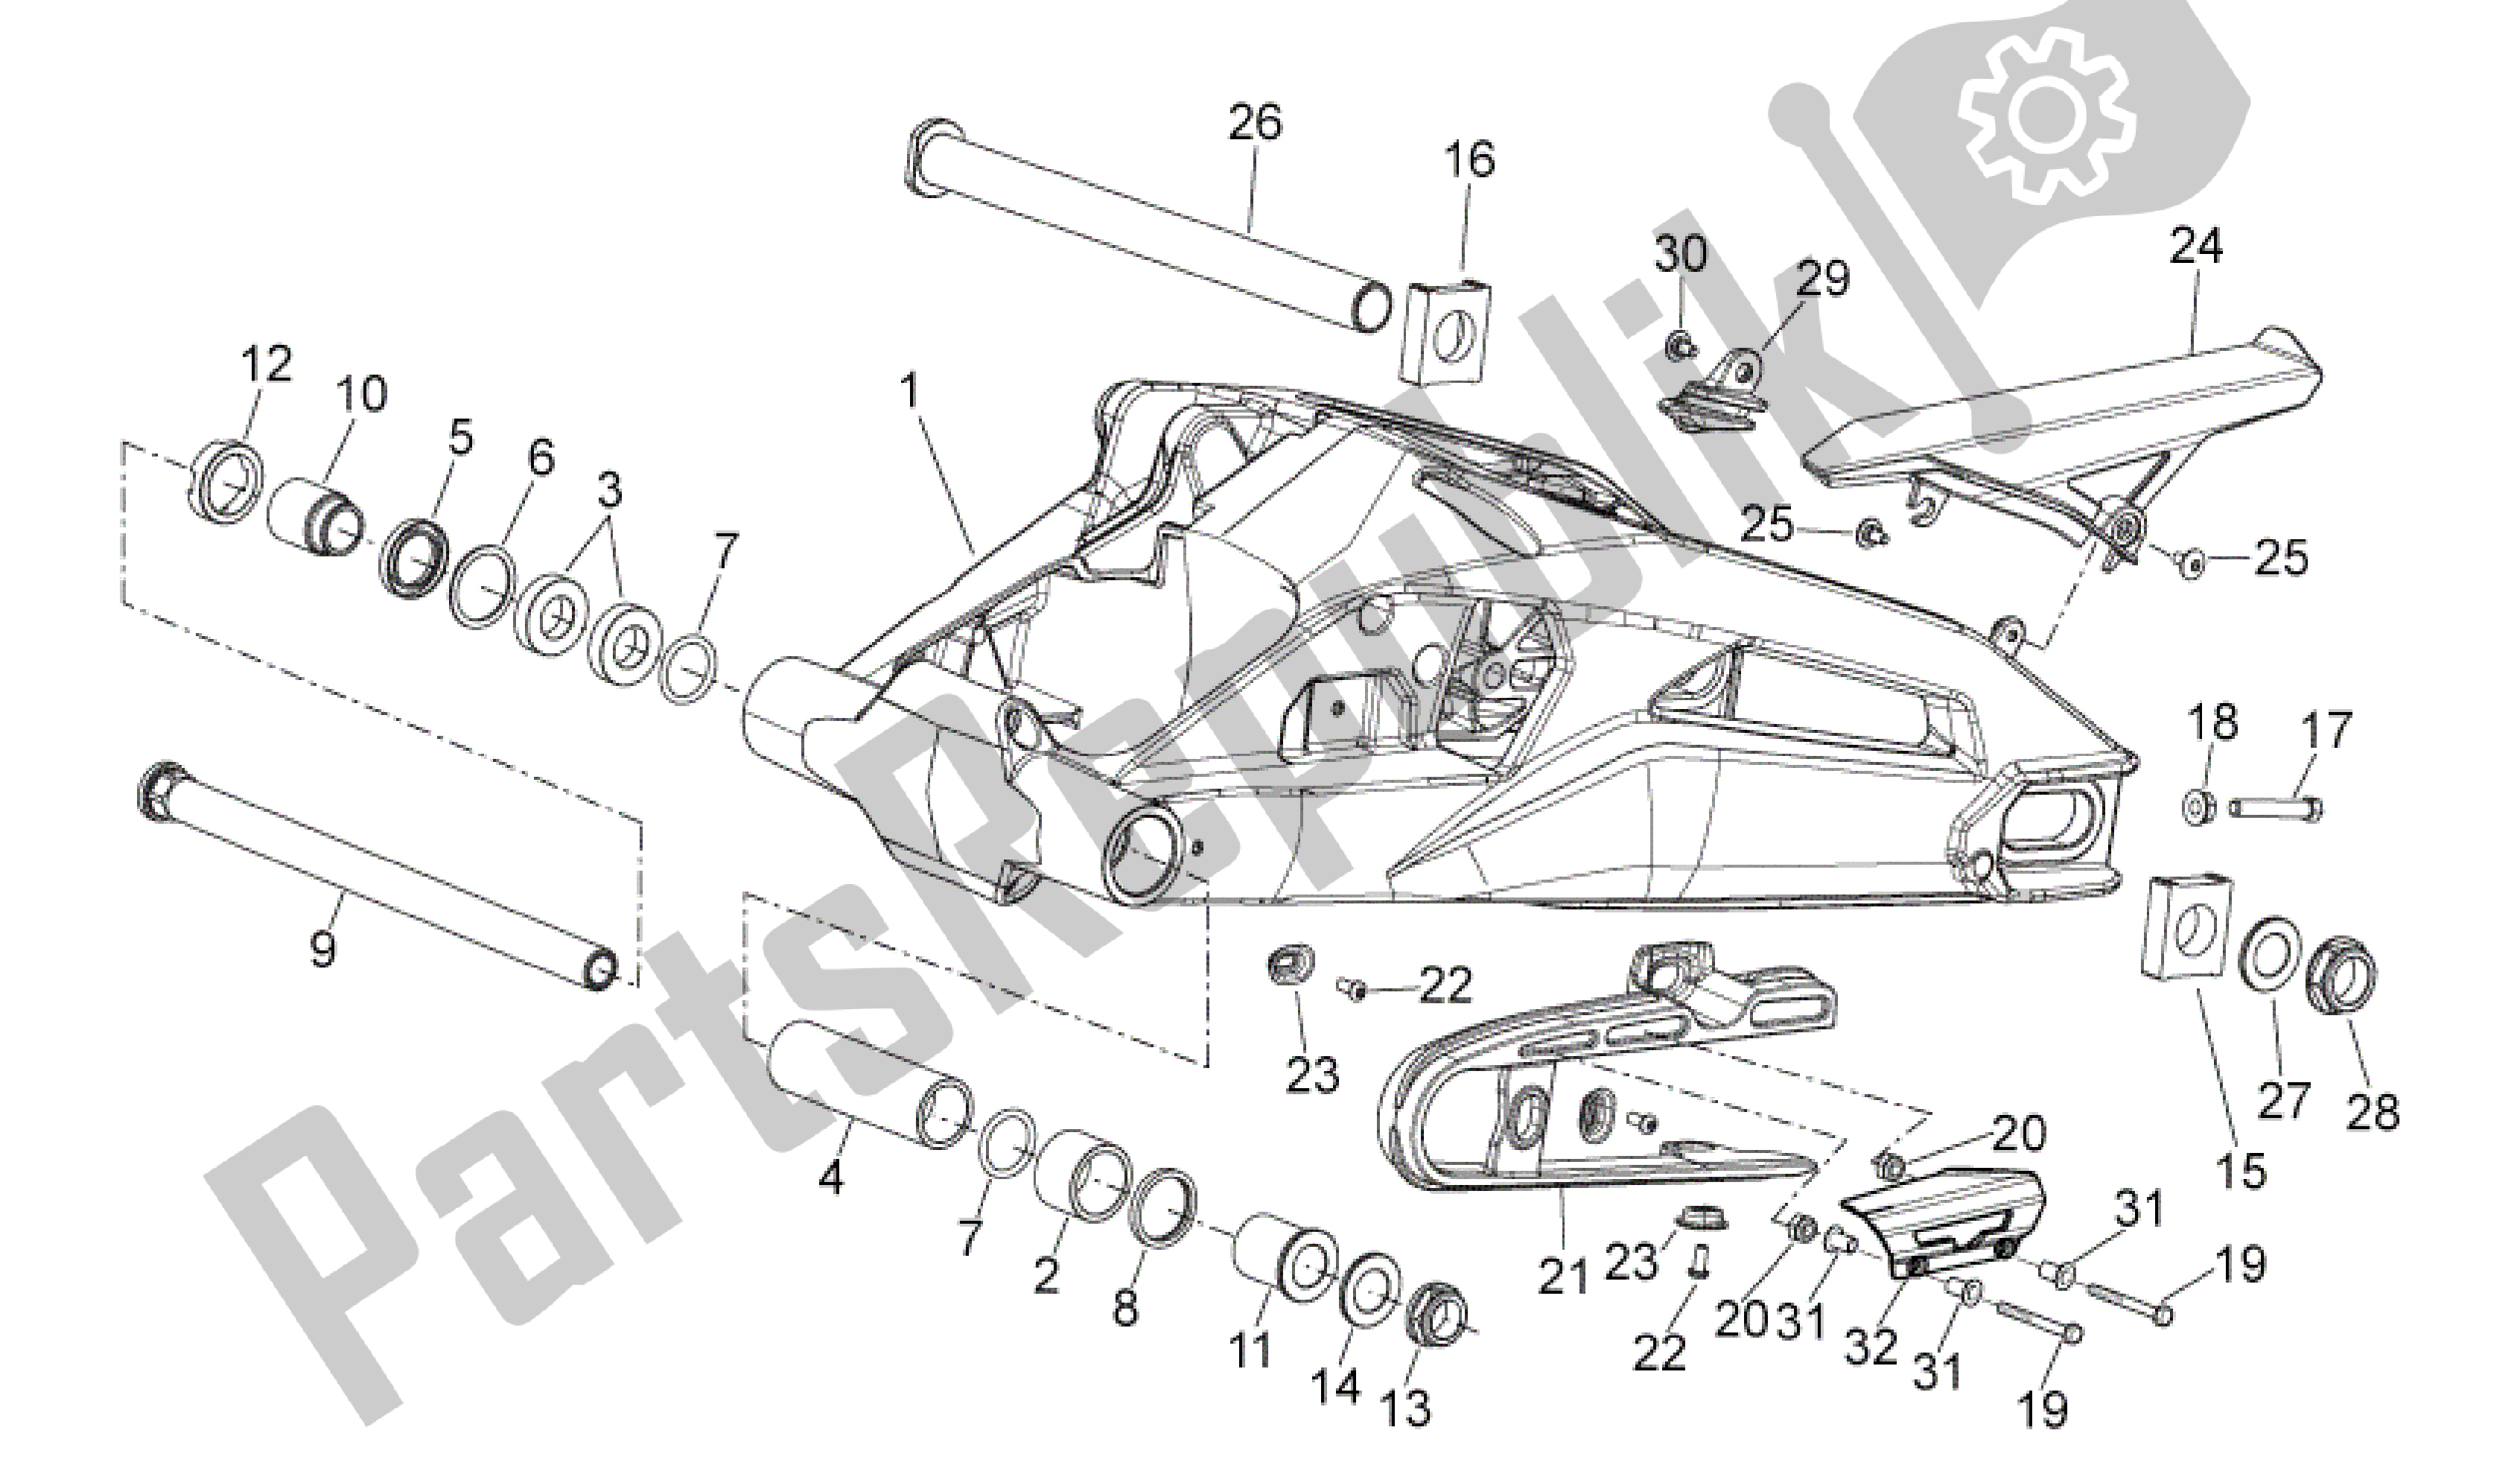 All parts for the Swing Arm of the Aprilia Shiver 750 2010 - 2013